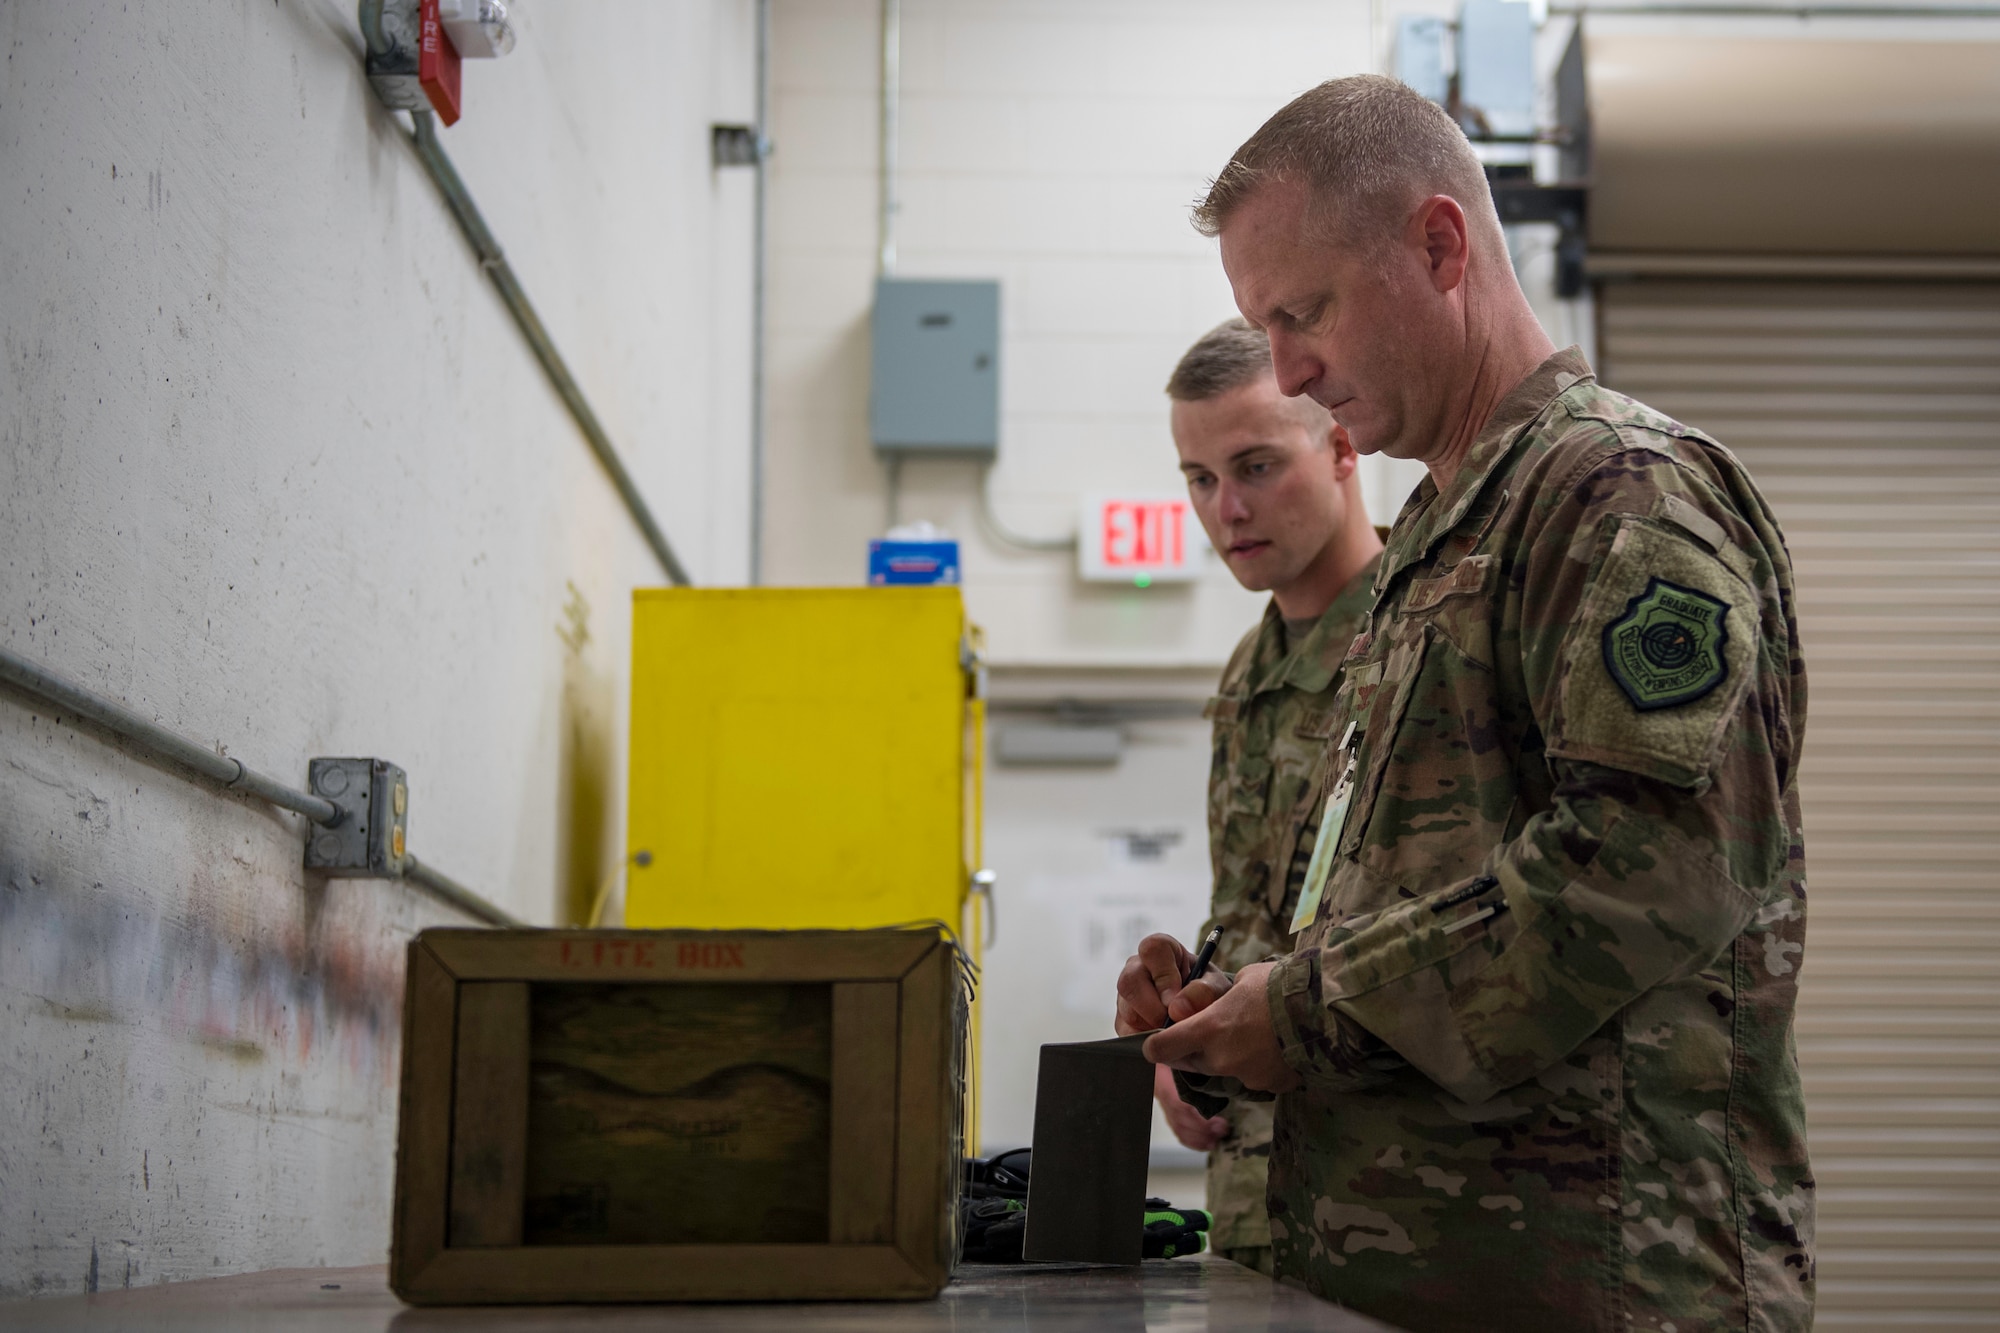 (Right) U.S. Air Force Col. Brian Laidlaw, 325th Fighter Wing commander, ‘shadows’ U.S. Air Force Airman 1st Class Thomas Knight, 325th Maintenance Squadron stockpile surveillance crew chief, and labels a box of munitions for inspection at Tyndall Air Force Base, Florida, July 17, 2019.